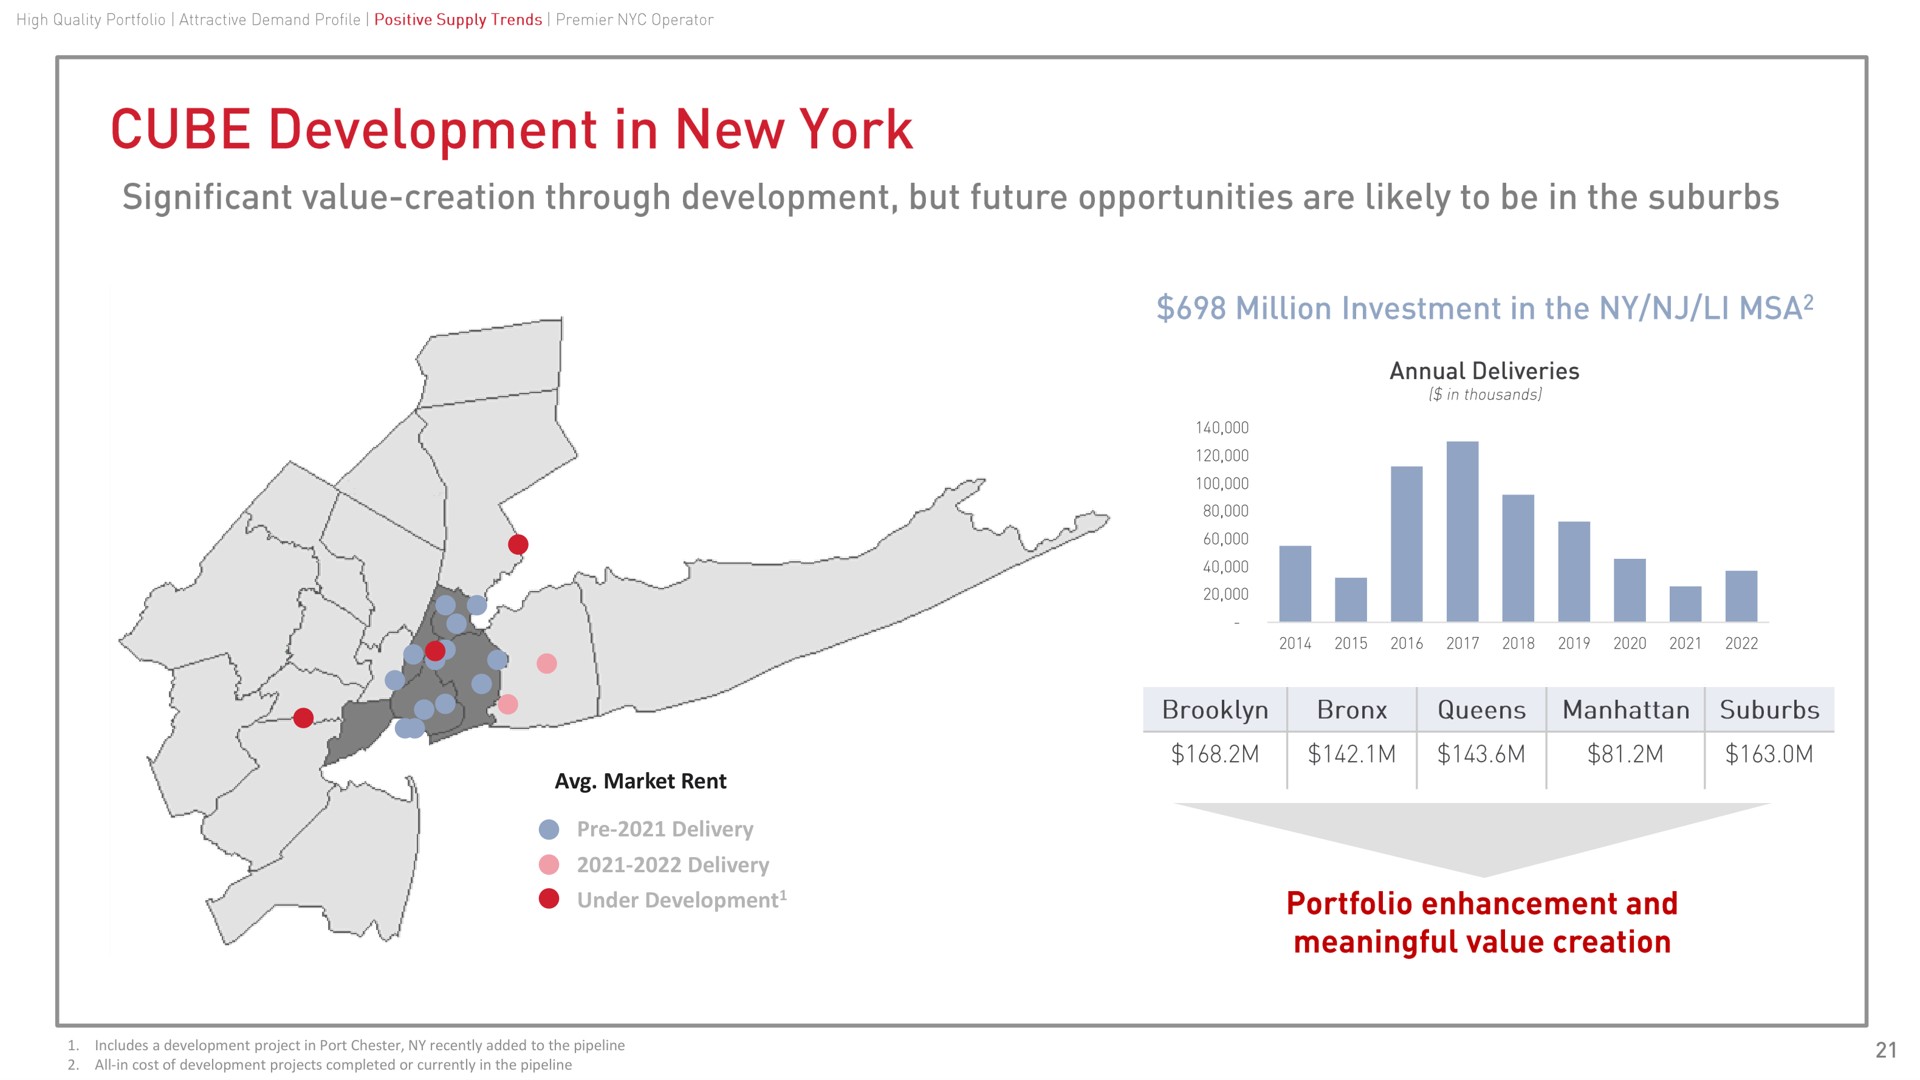 market rent delivery delivery under development includes a development project in port chester recently added to the pipeline all in cost of development projects completed or currently in the pipeline cube new york significant value creation through but future opportunities are likely be suburbs million investment meaningful value creation portfolio enhancement and | CubeSmart